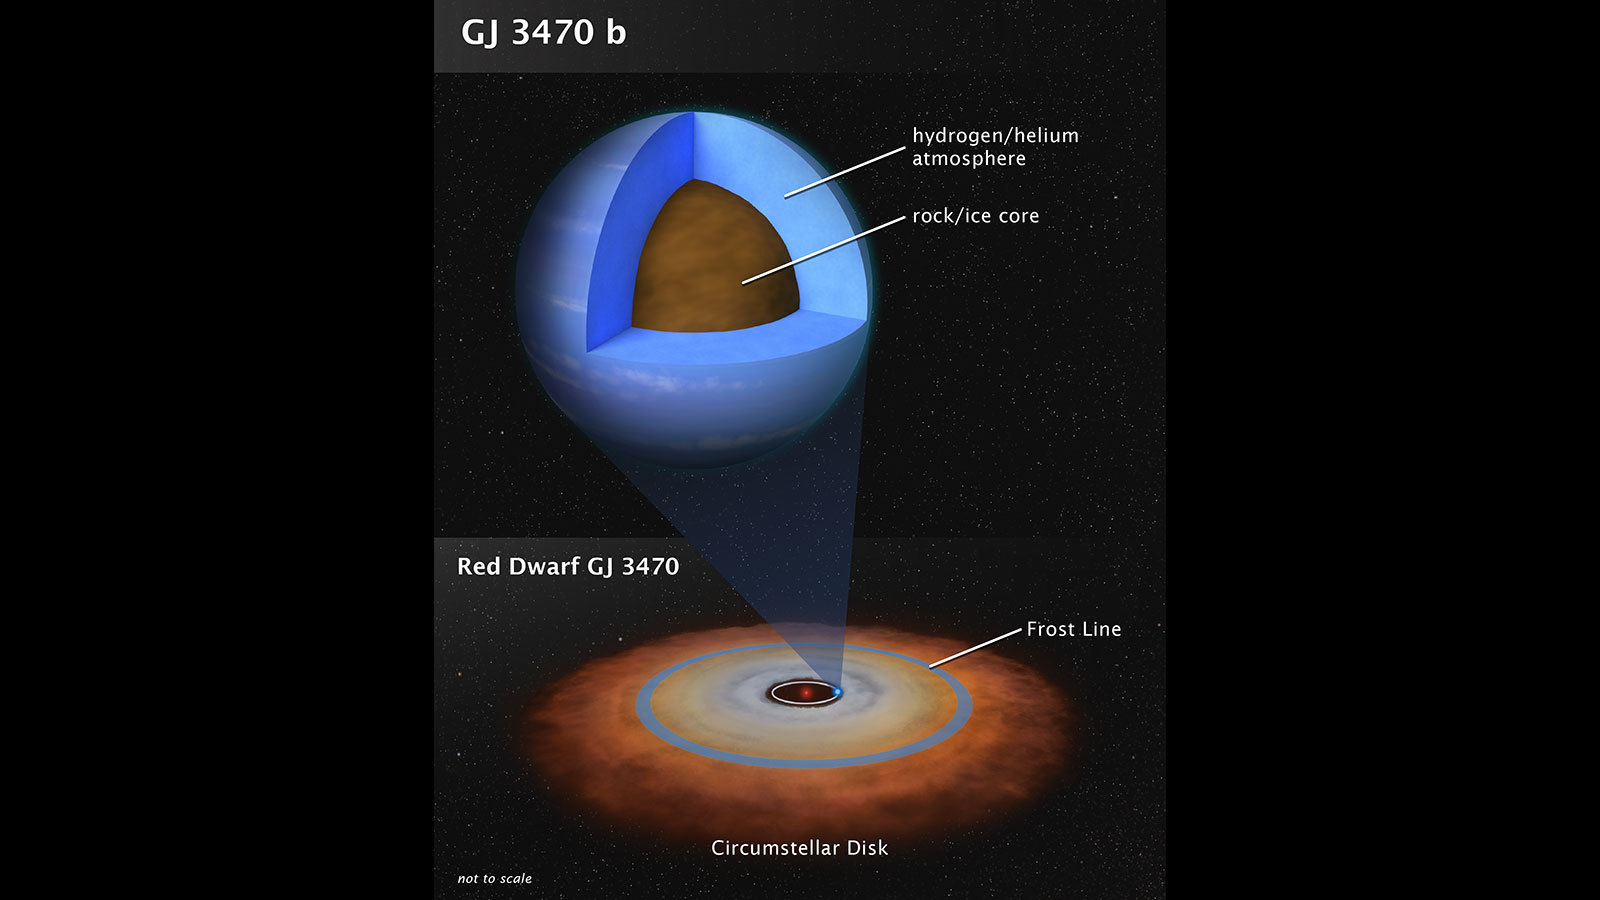 This artist's illustration shows the theoretical internal structure of the exoplanet GJ 3470 b